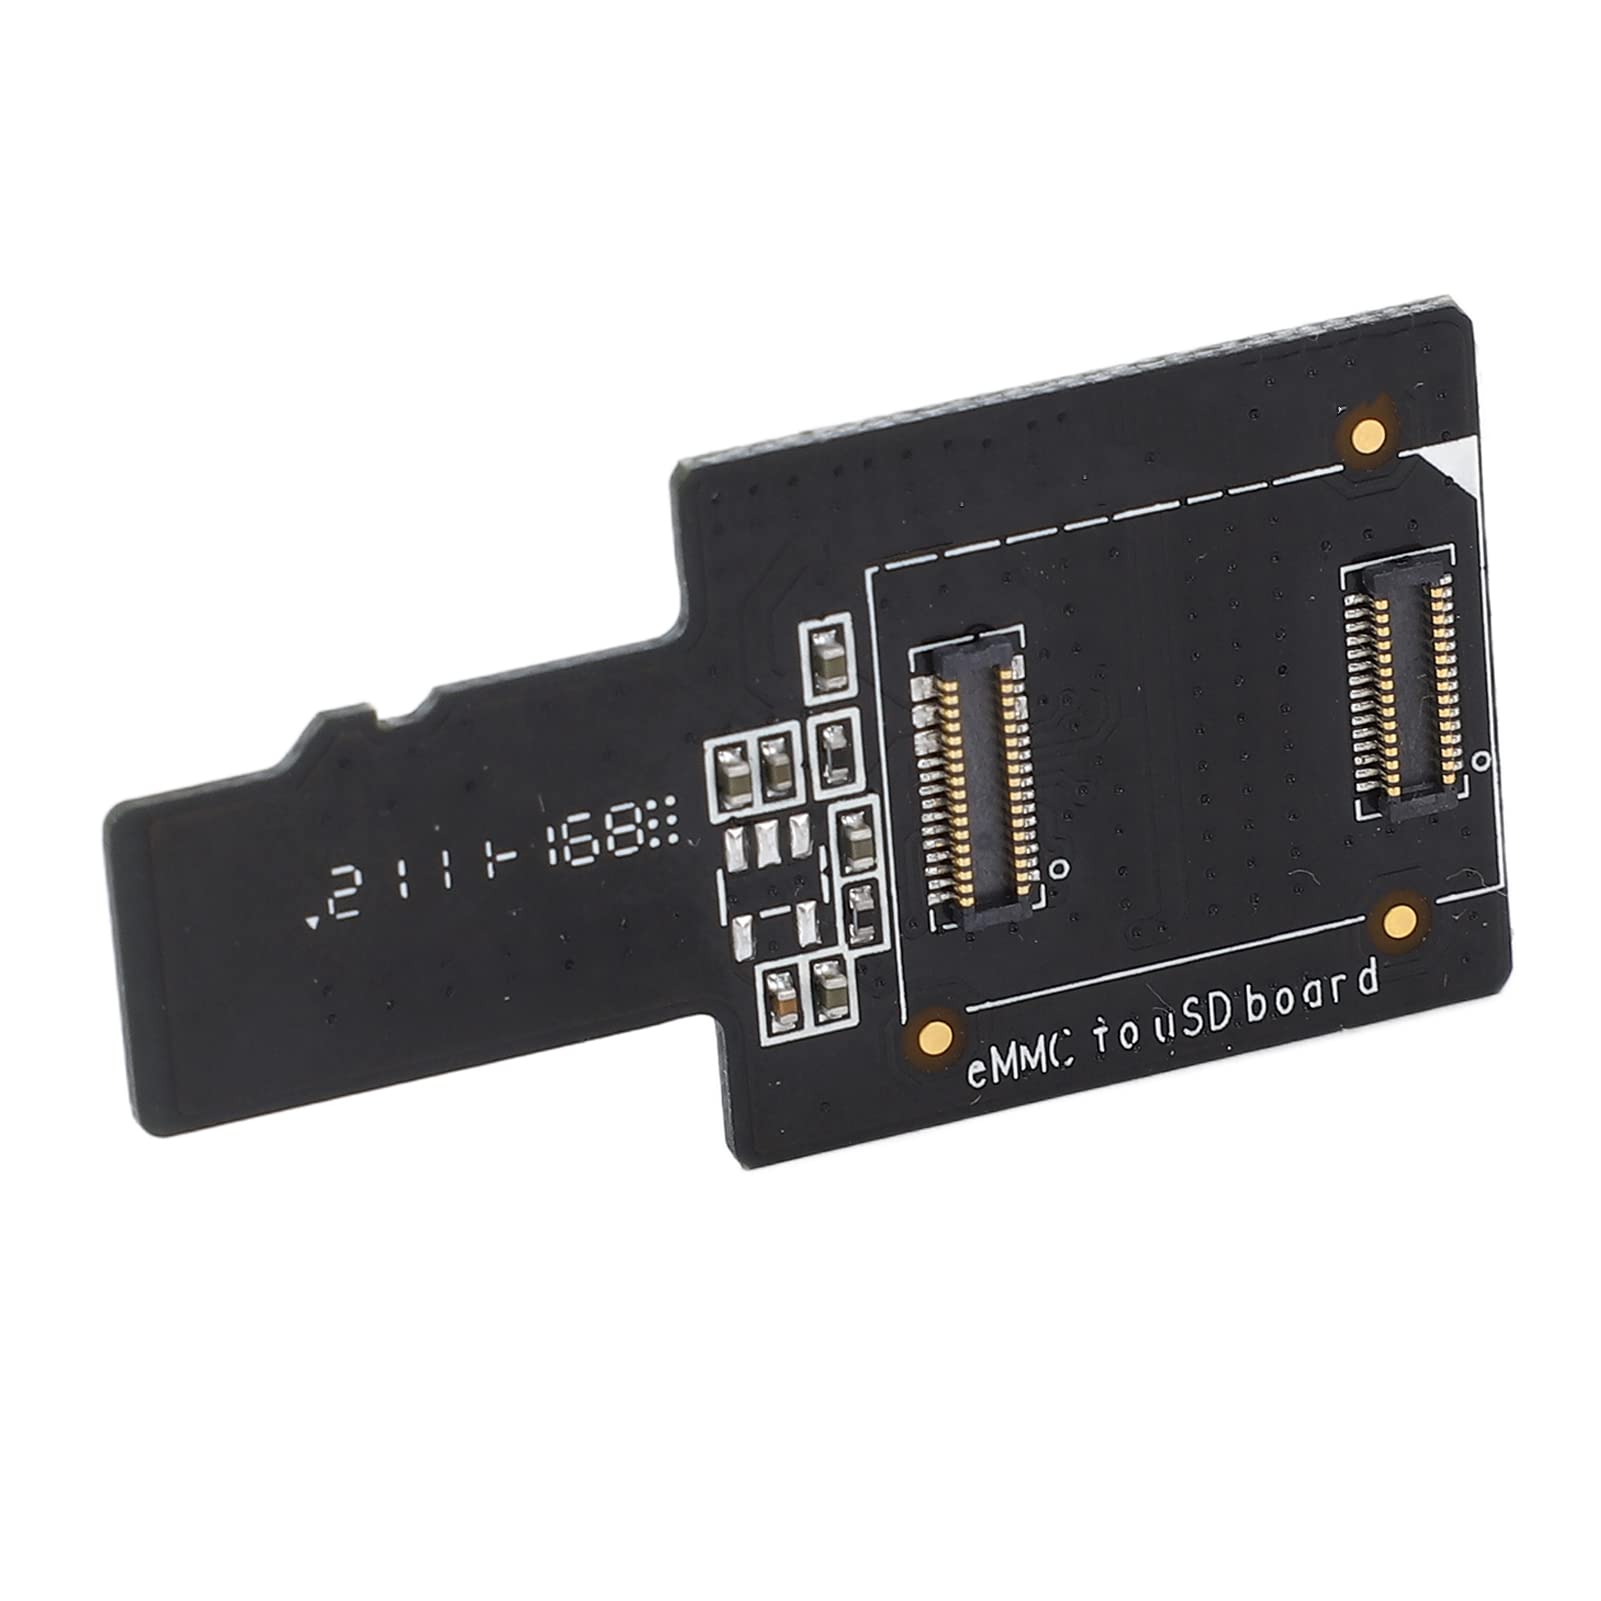 Mua Hilitand 5pcs Emmc To Usd Adapter Intermittent Generate Image Accurate Emmc To Storage Card 5674